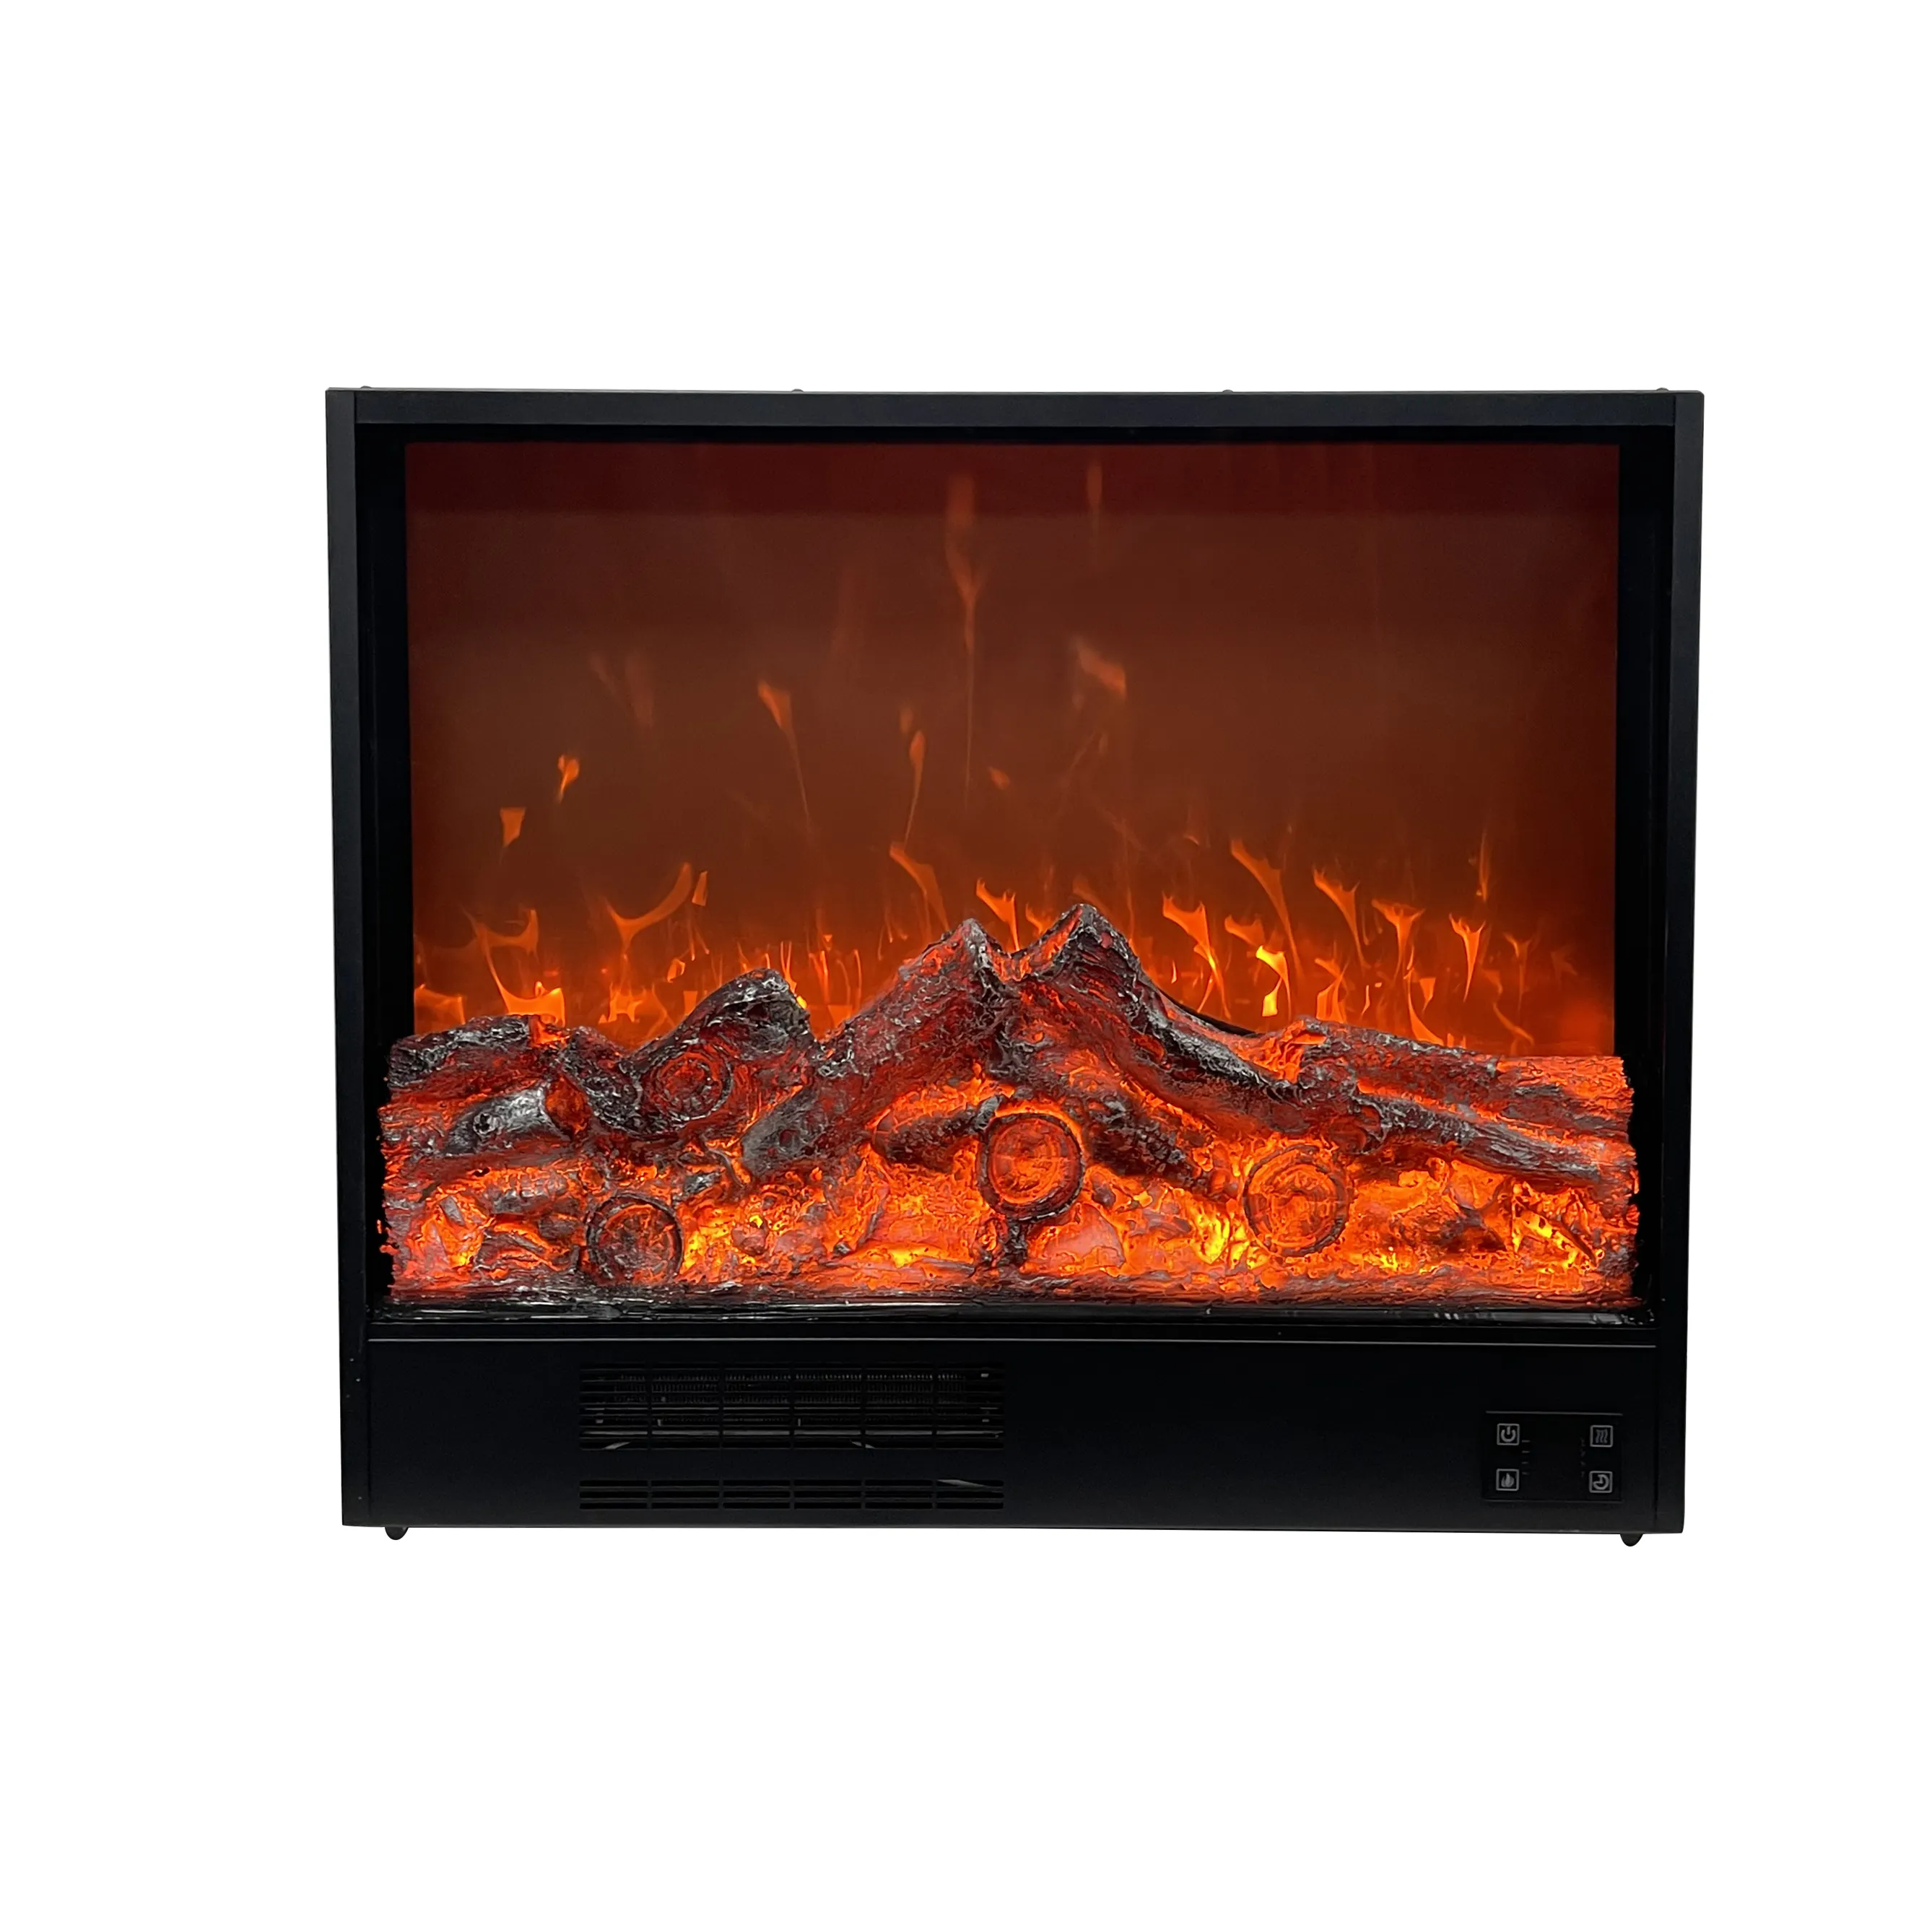 750w-1500w modern led flame decorative infrared room energy efficient electric heater fireplace